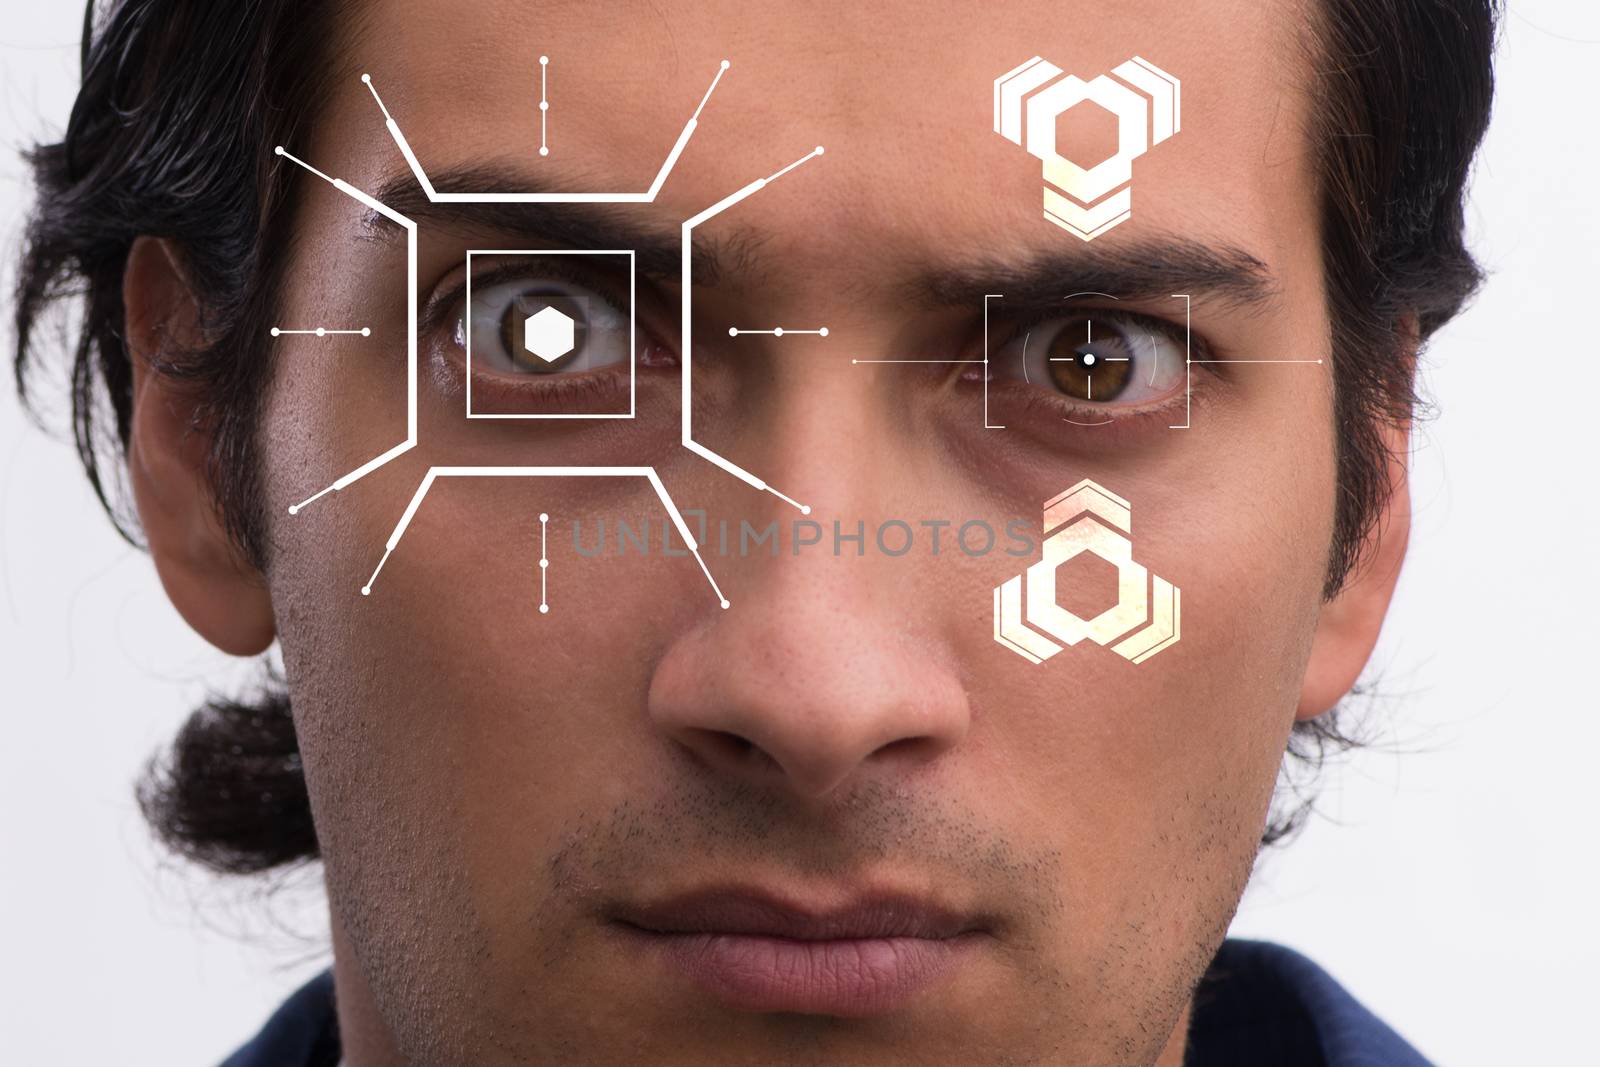 Concept of sensor implanted into human eye by Elnur